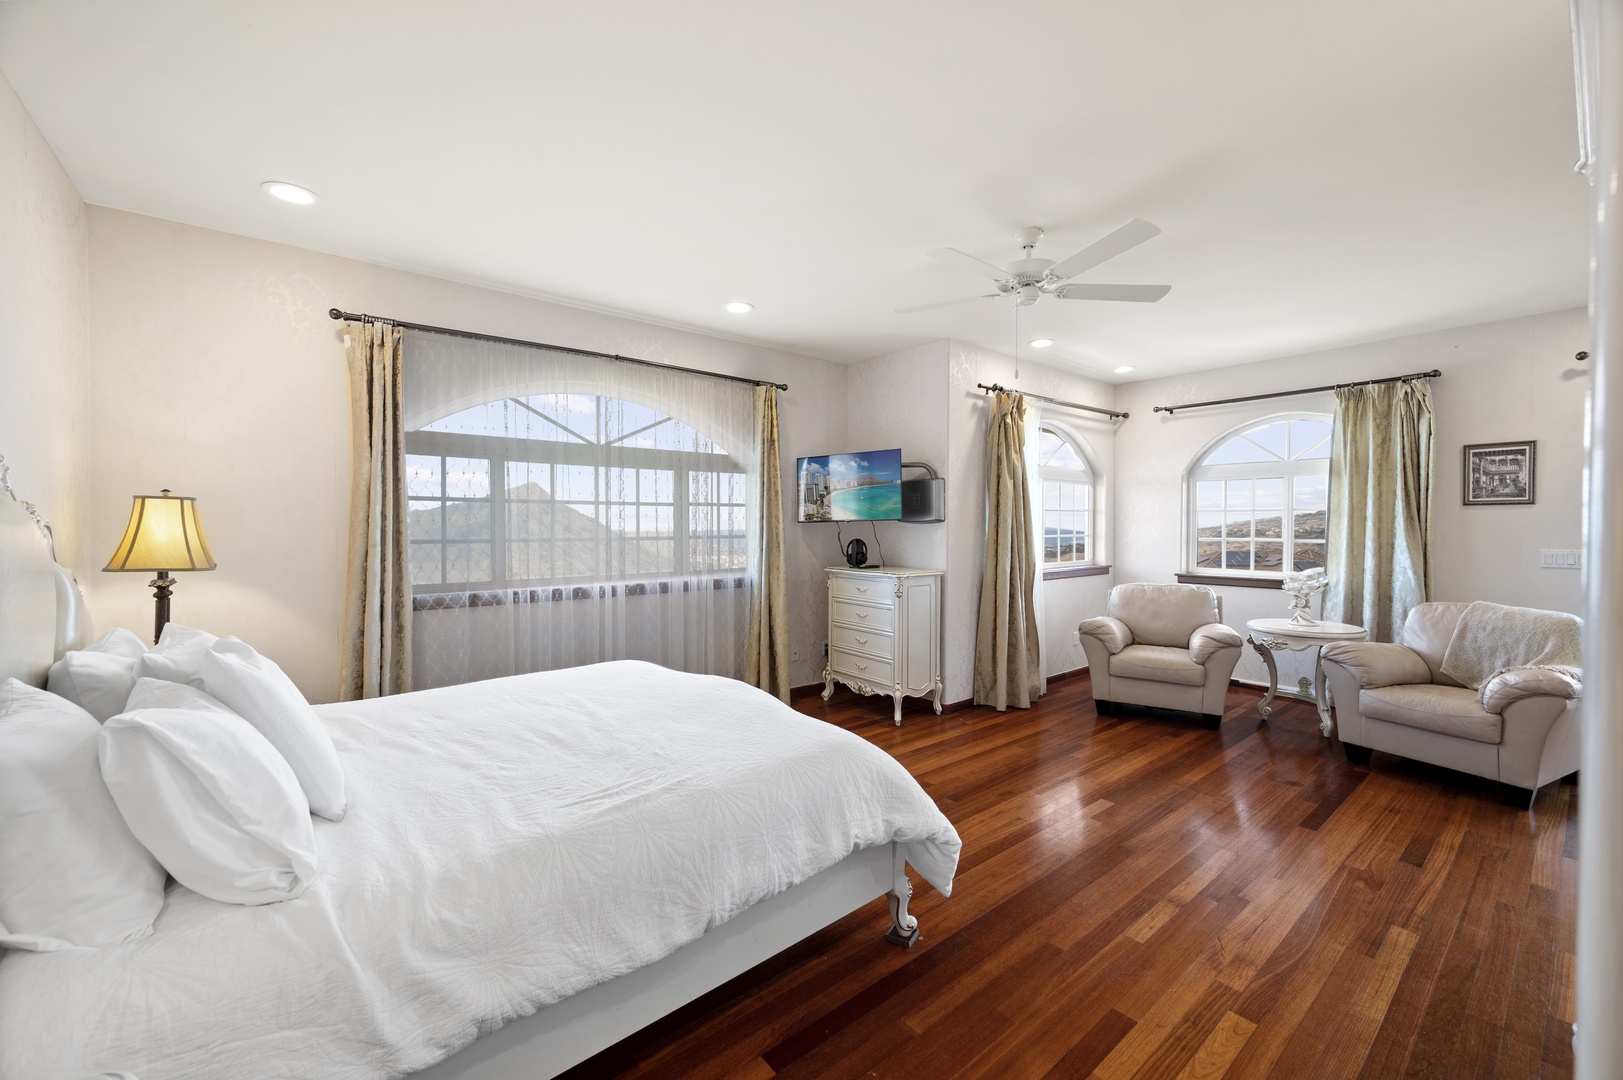 Honolulu Vacation Rentals, Lotus on a Hill* - The Primary Bedroom boasts a king bed, ceiling fan, and is drenched in natural light